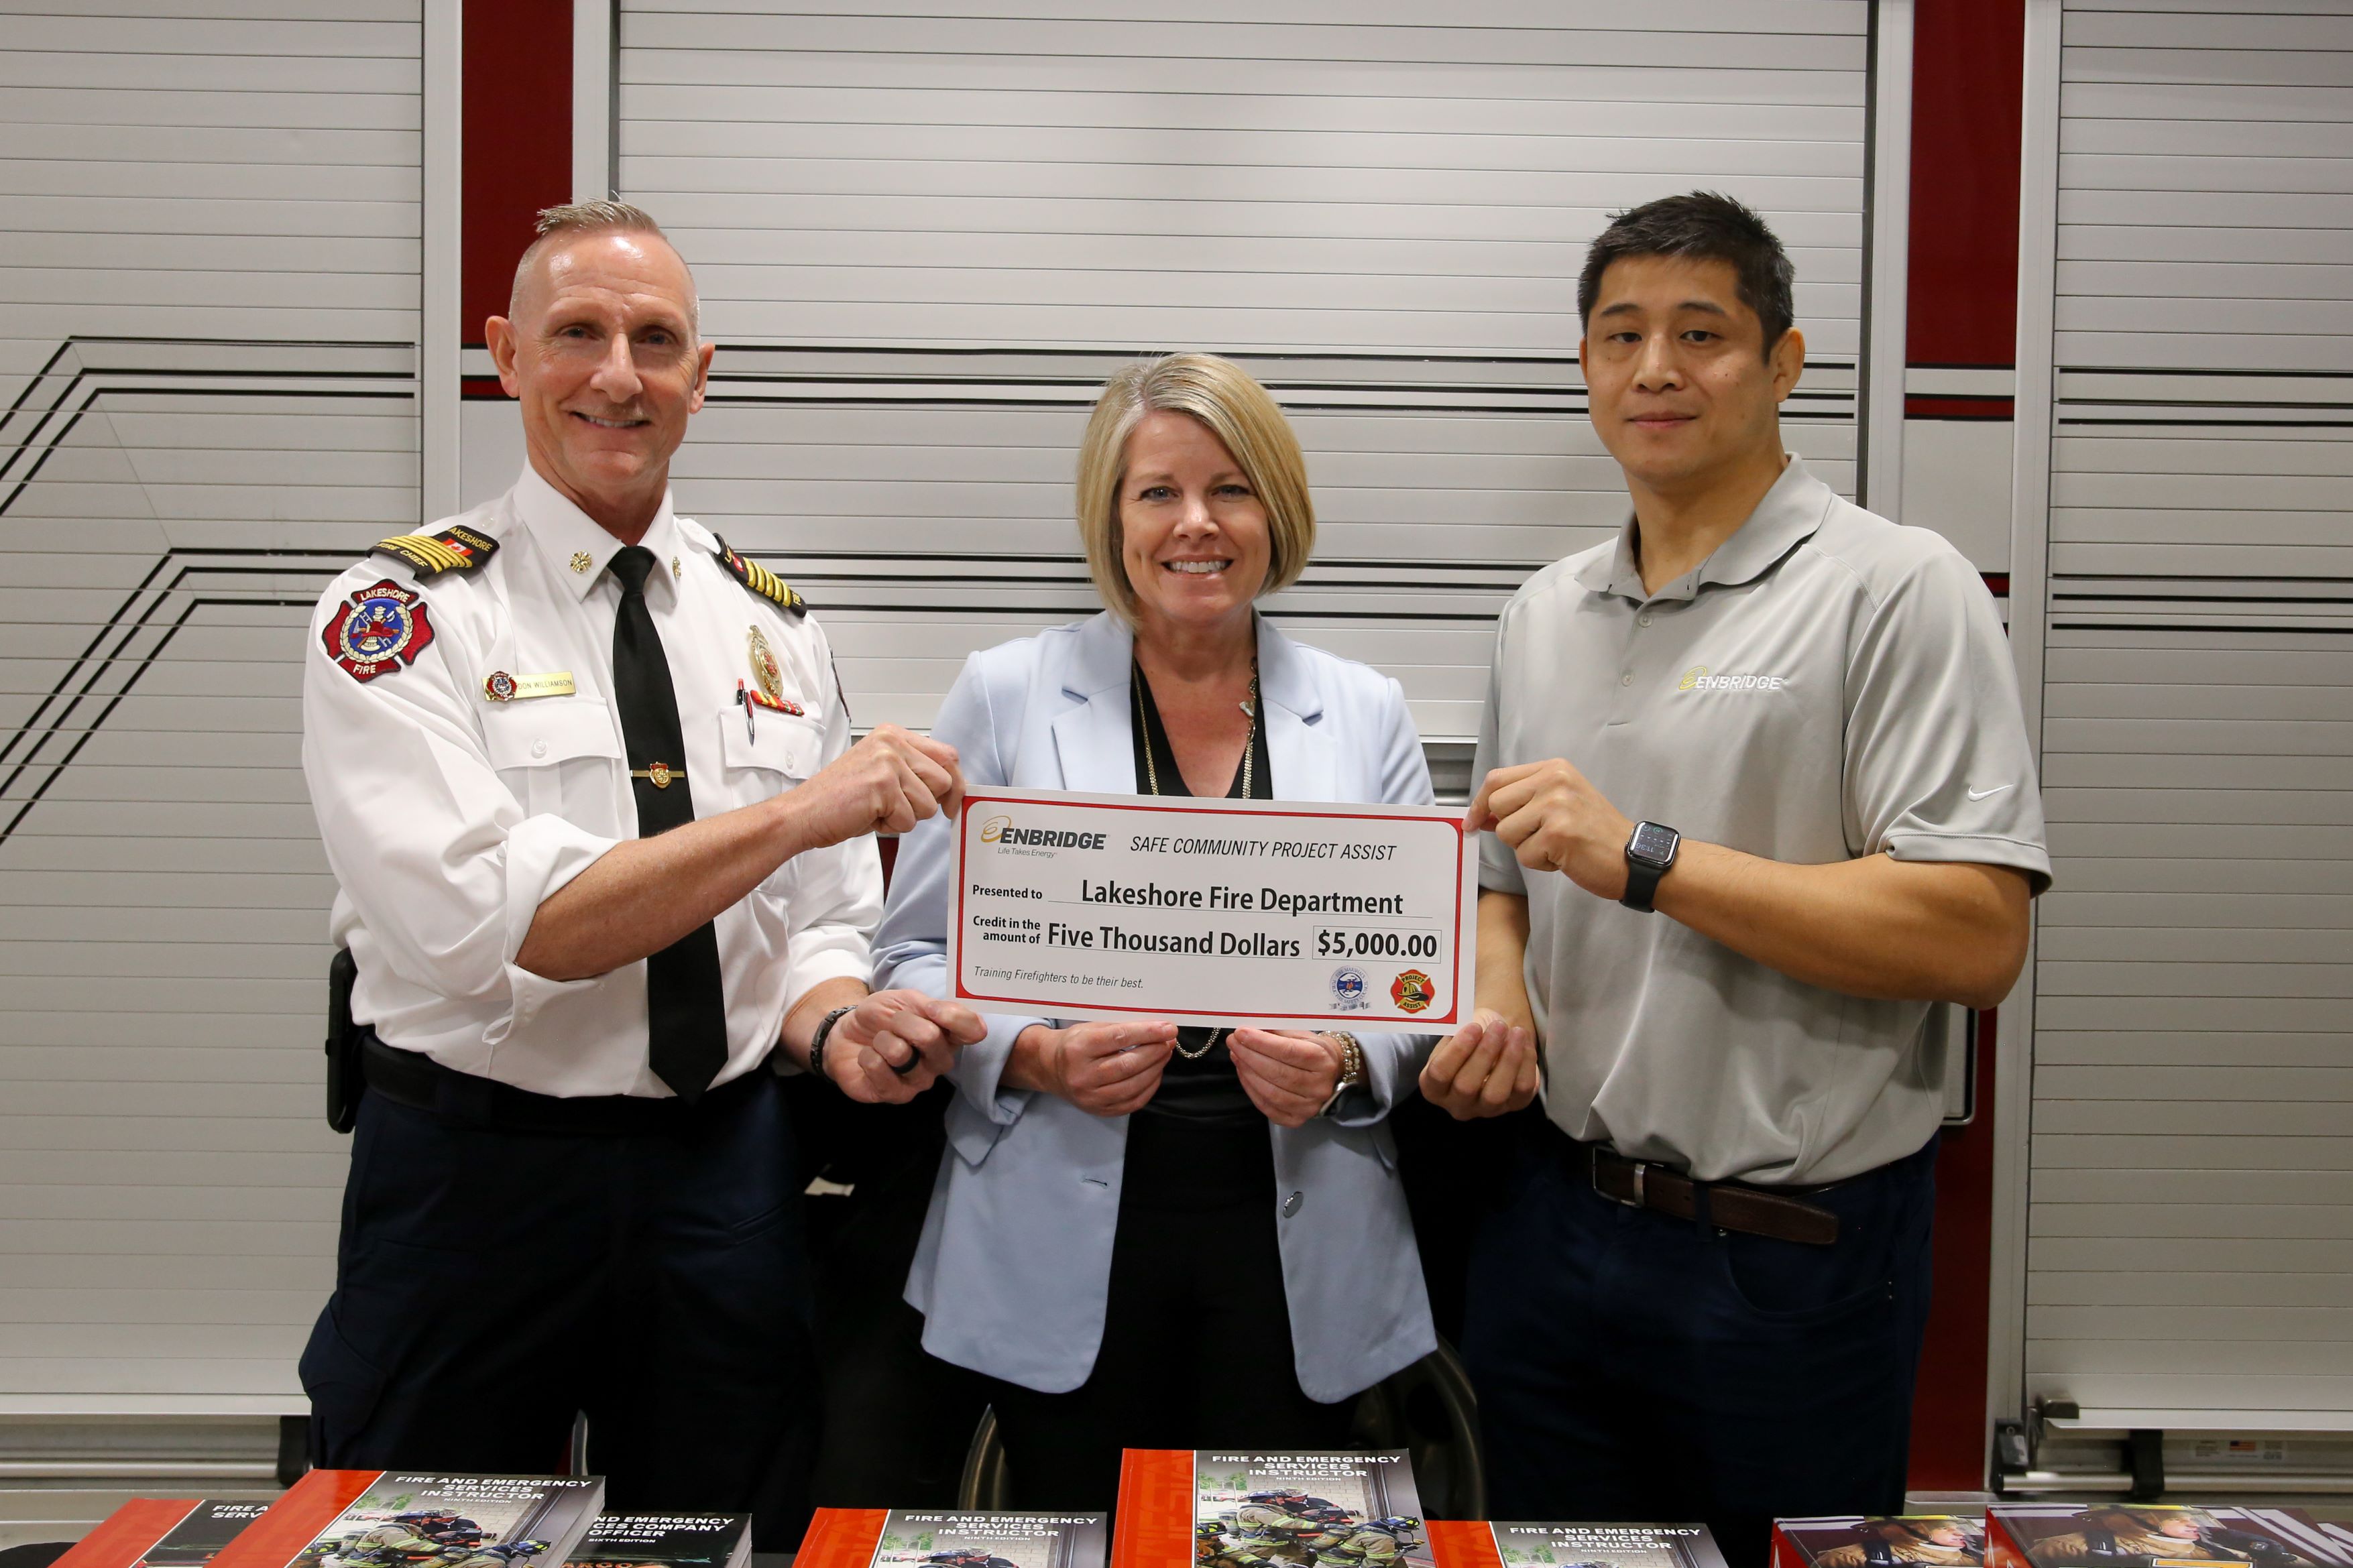 Photo of Fire Chief, Mayor, and Enbridge representative holding a $5,000 cheque.